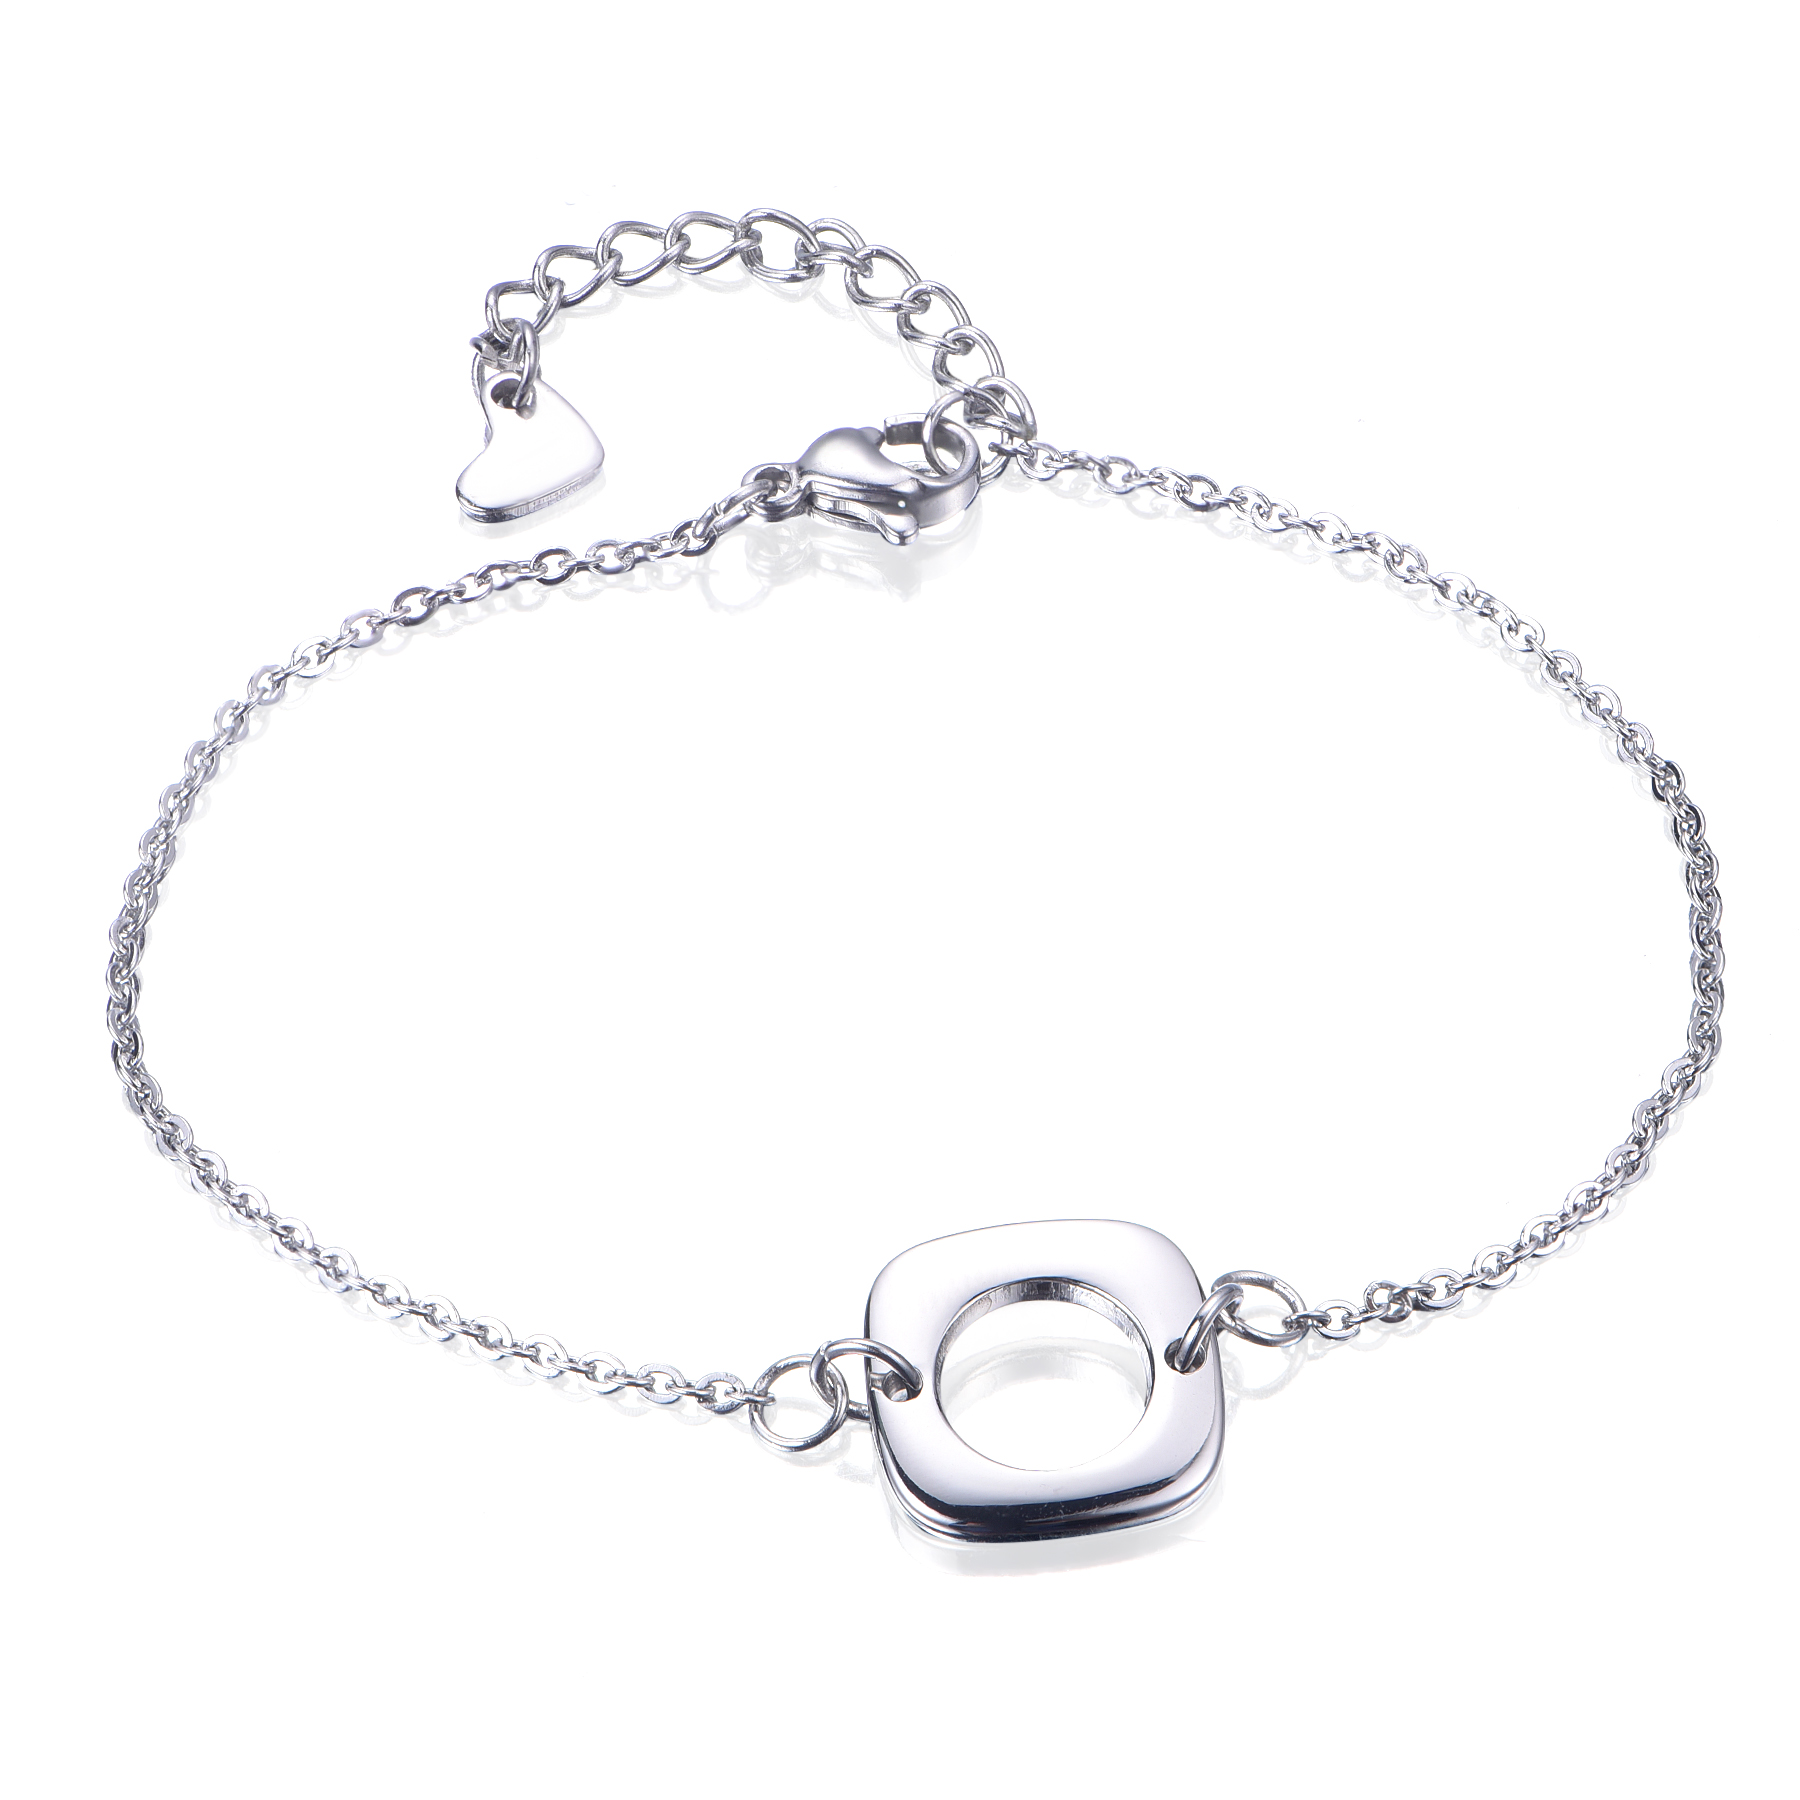 Classic Silver Plated Stainless Steel Female Square Geometric Chain Bracelet BL7-21